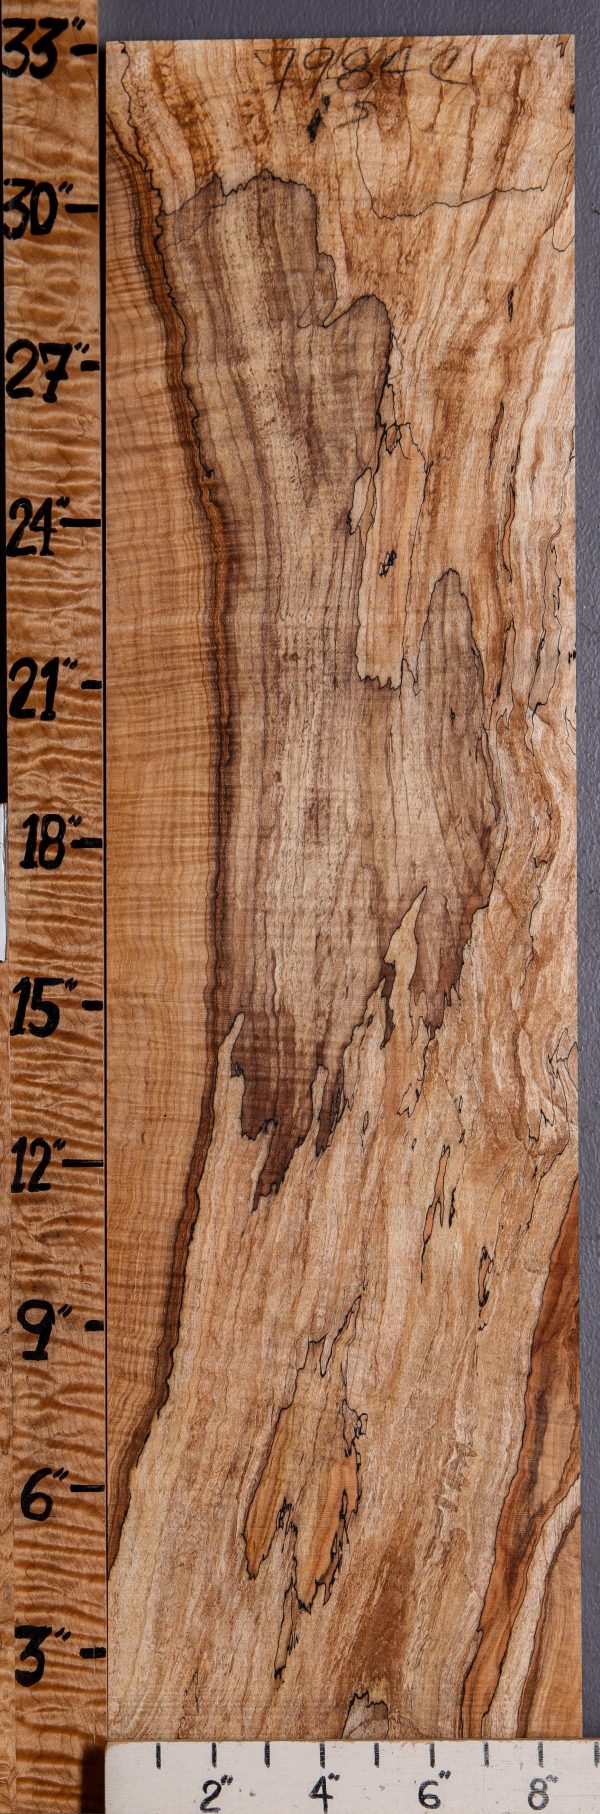 5A Spalted Curly Maple Microlumber 8"3/4 X 33" X 1/2 (NWT-7984C)